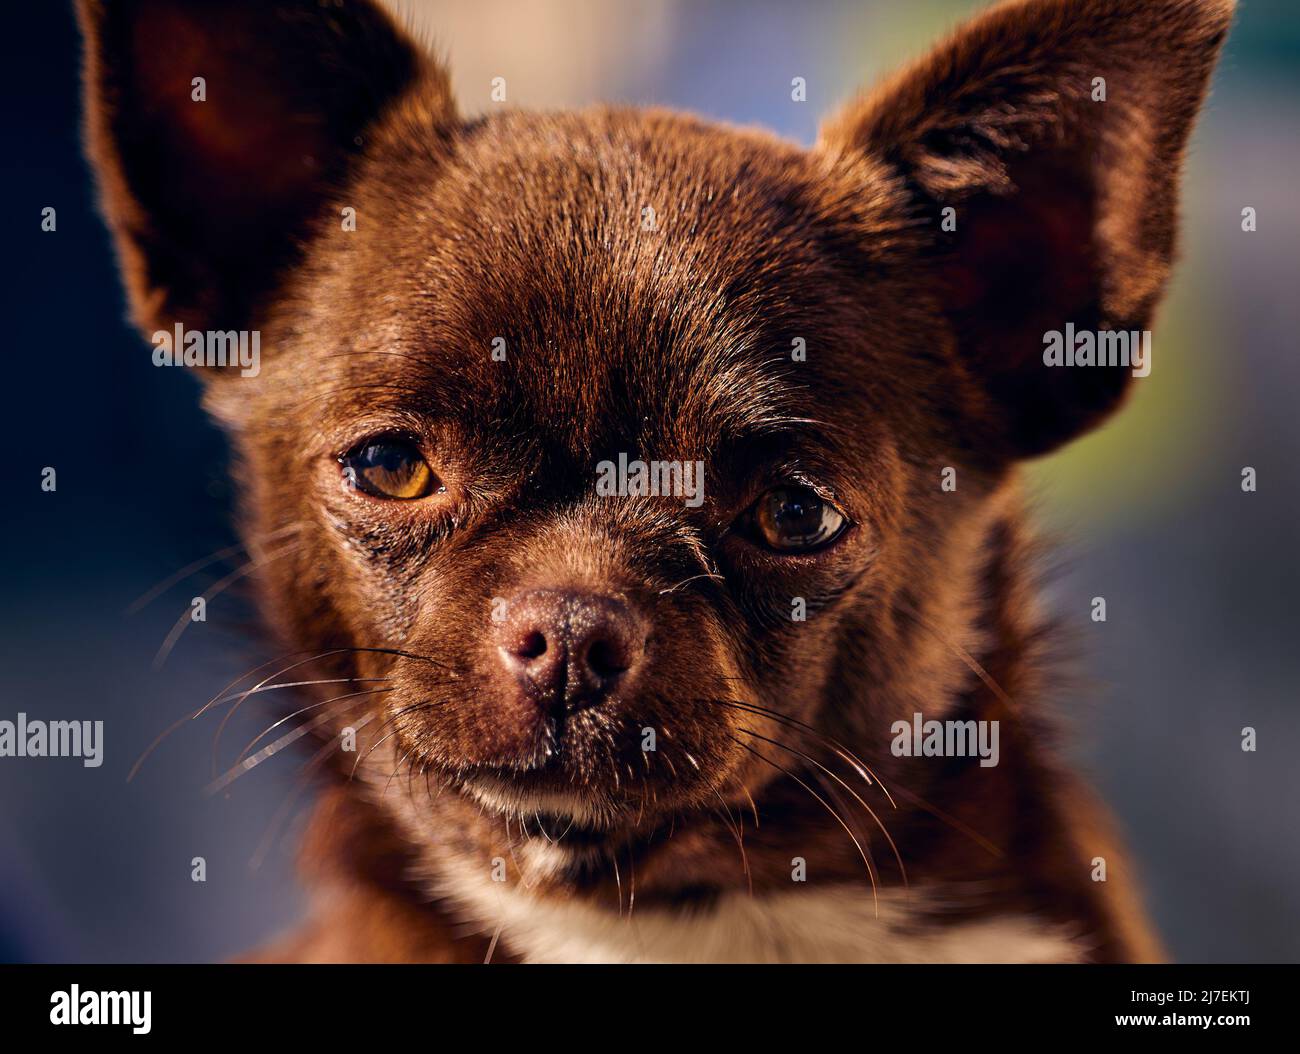 A portrait chocolate-colored chihuahua dog with blurred background Stock Photo